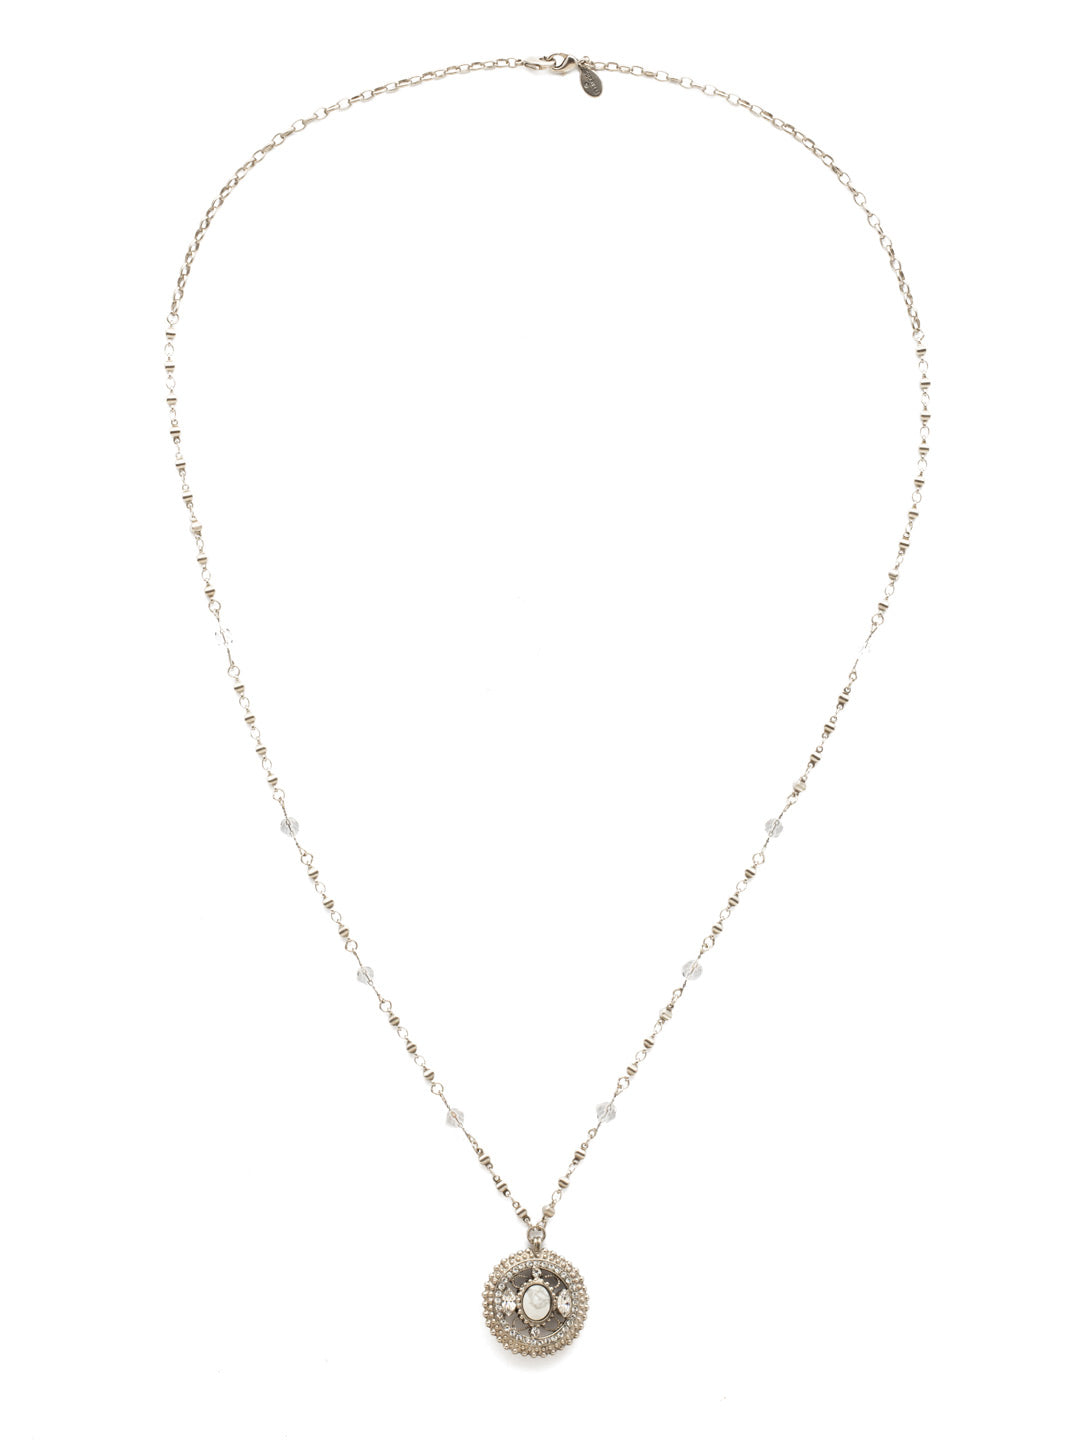 Majestic Medallion Pendant - NDK3ASCRY - An ornate gem-laden medallion is highlighted by a delicate textured chain in this must-have design. This style also features a double lobster claw closure which allows for extreme length adjustment and easy layering with other necklaces. From Sorrelli's Crystal collection in our Antique Silver-tone finish.